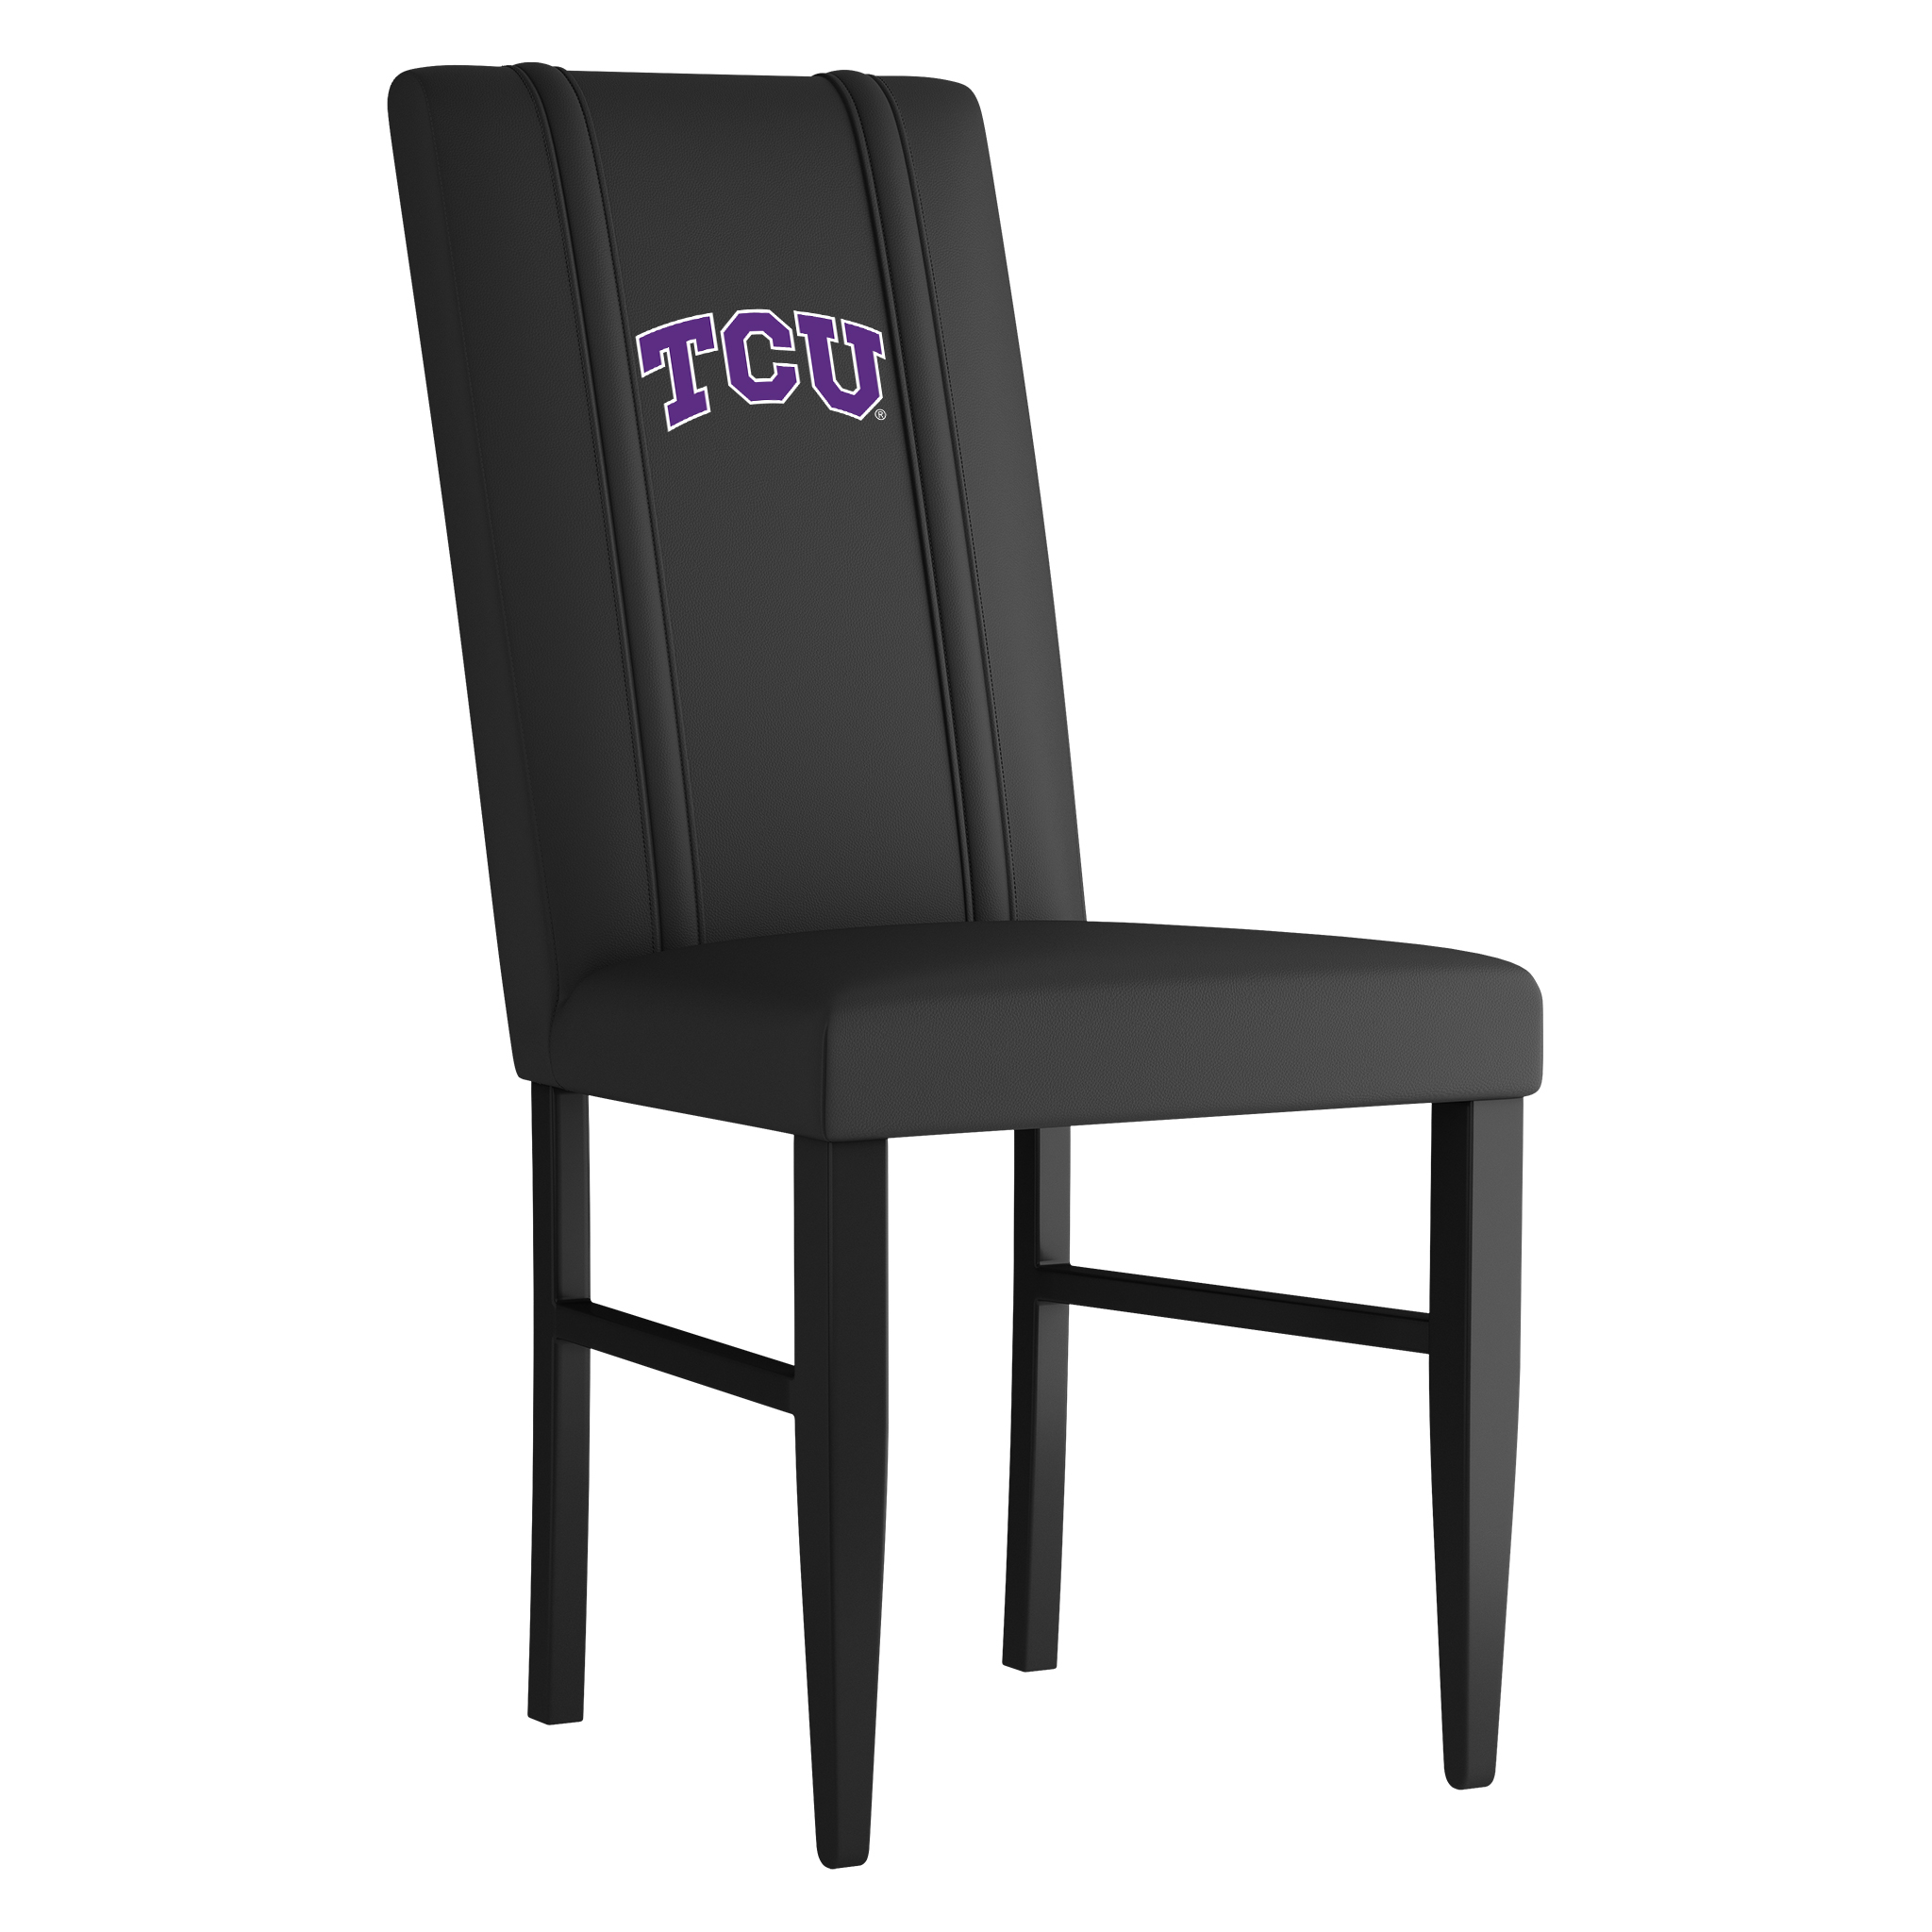 Tcu Horned Frogs Side Chair 2000 With Tcu Horned Frogs Primary